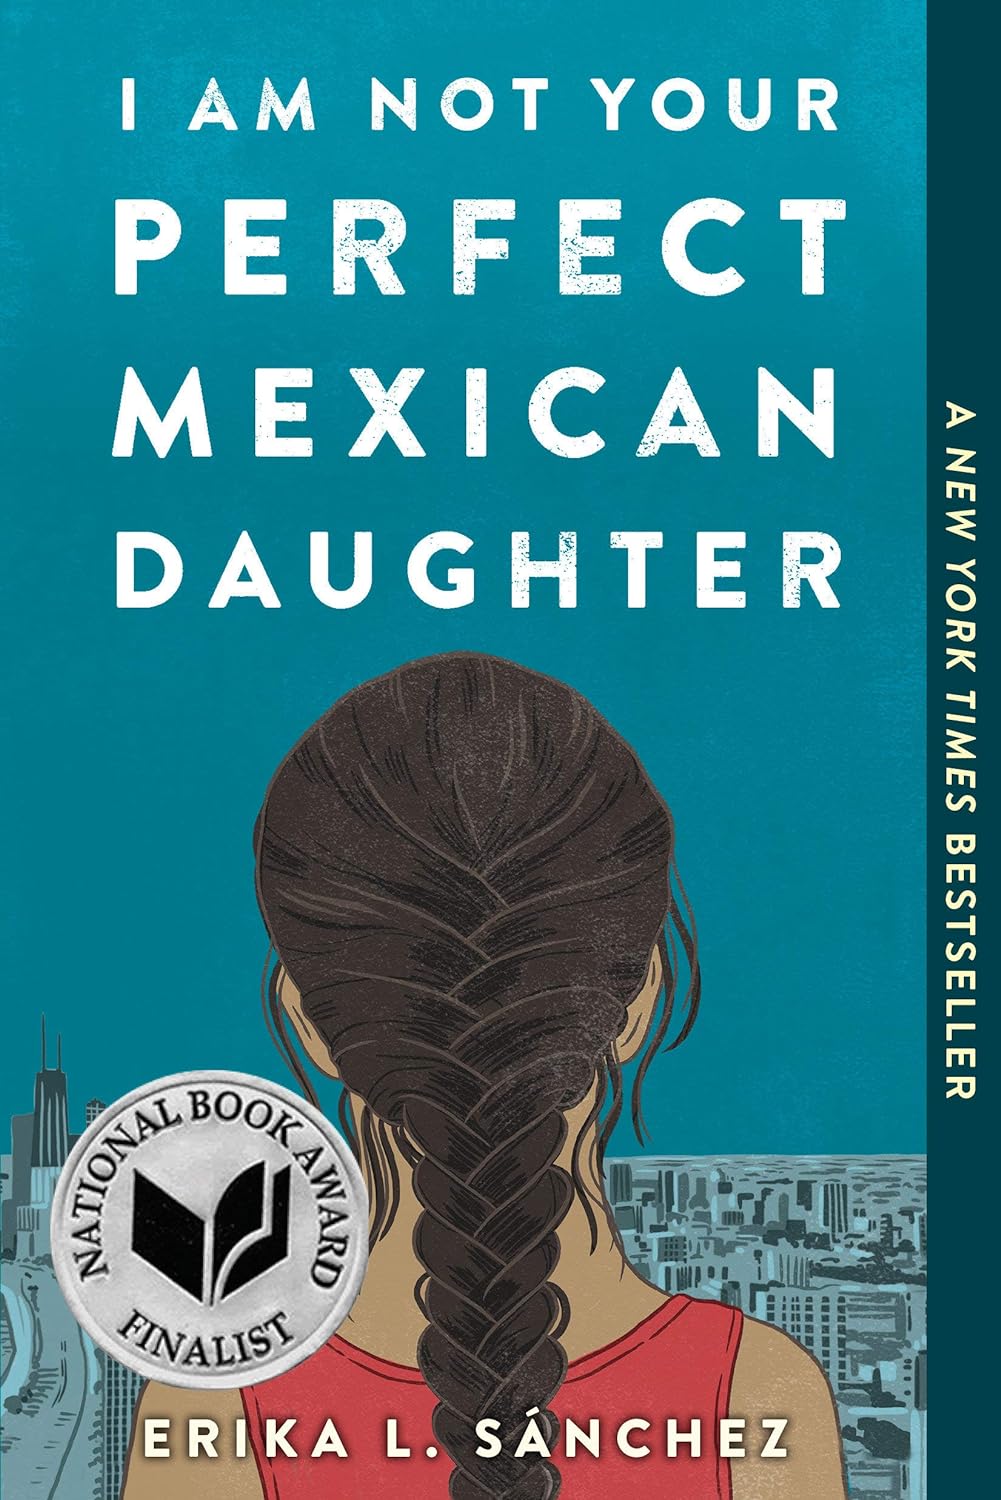 I Am Not Your Perfect Mexican Daughter  by Erika L. Sánchez